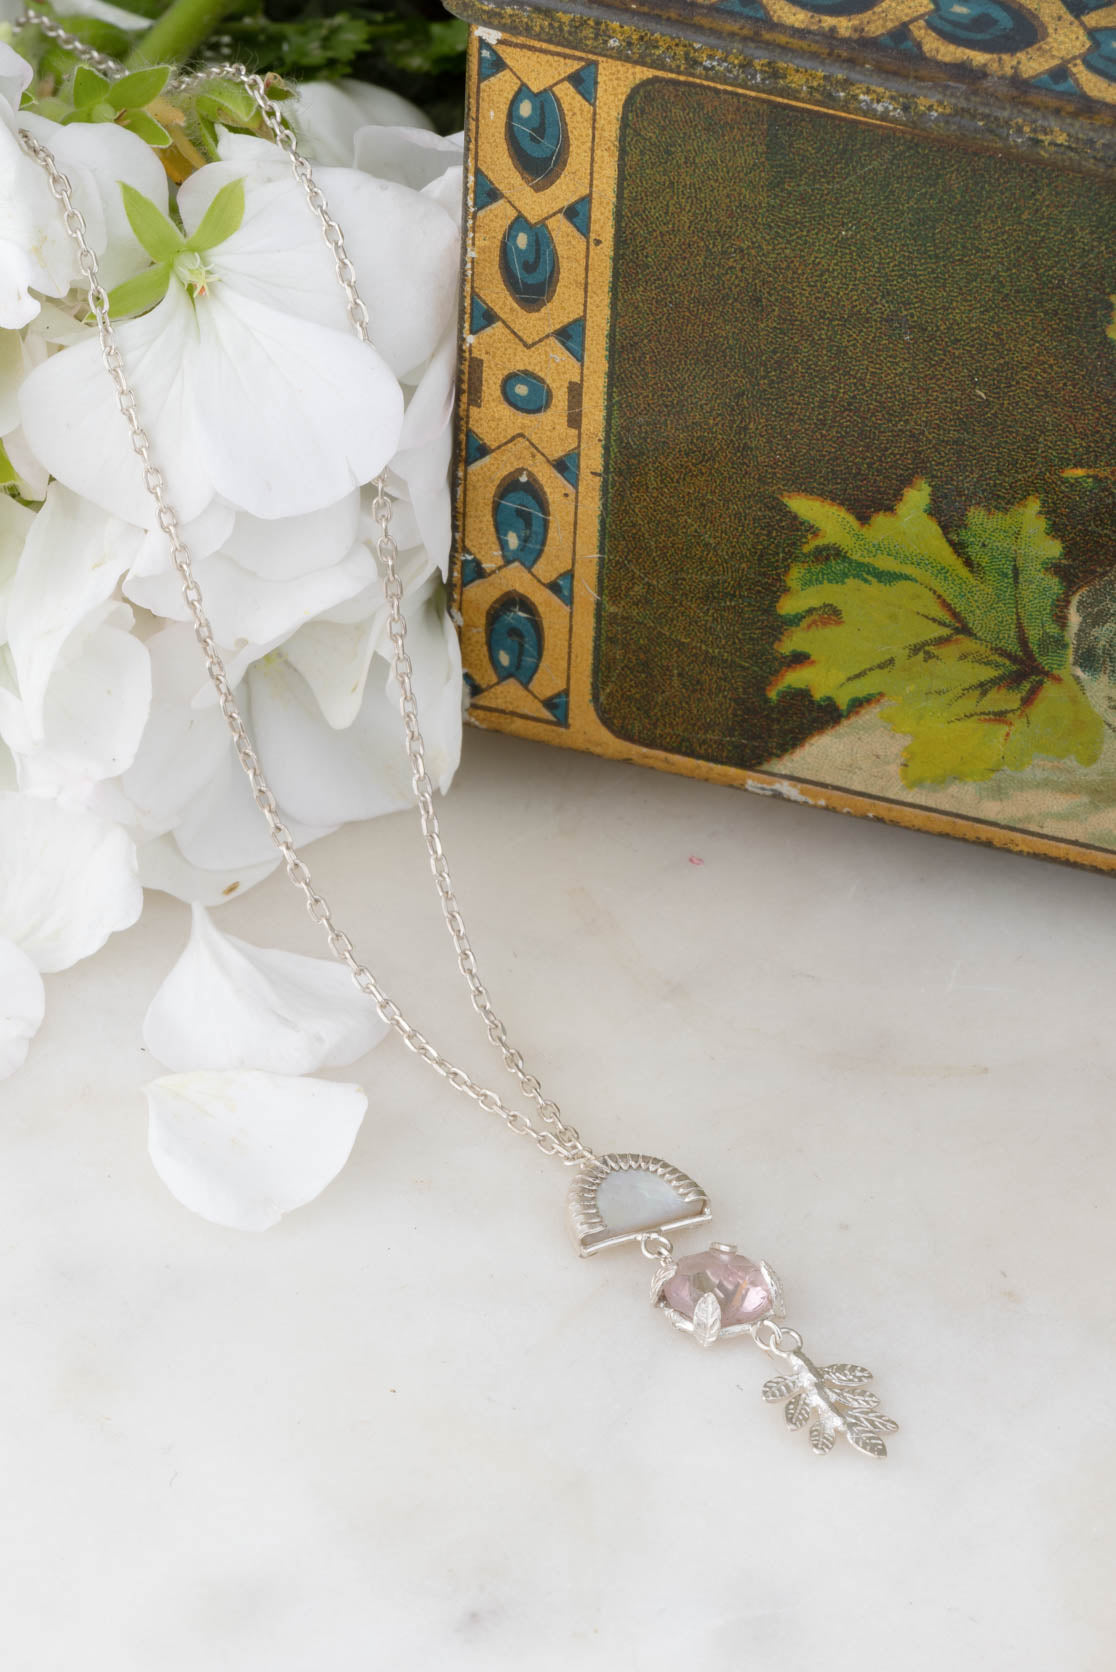 Botanical Drop Necklace- pink tourmaline and mother of pearl